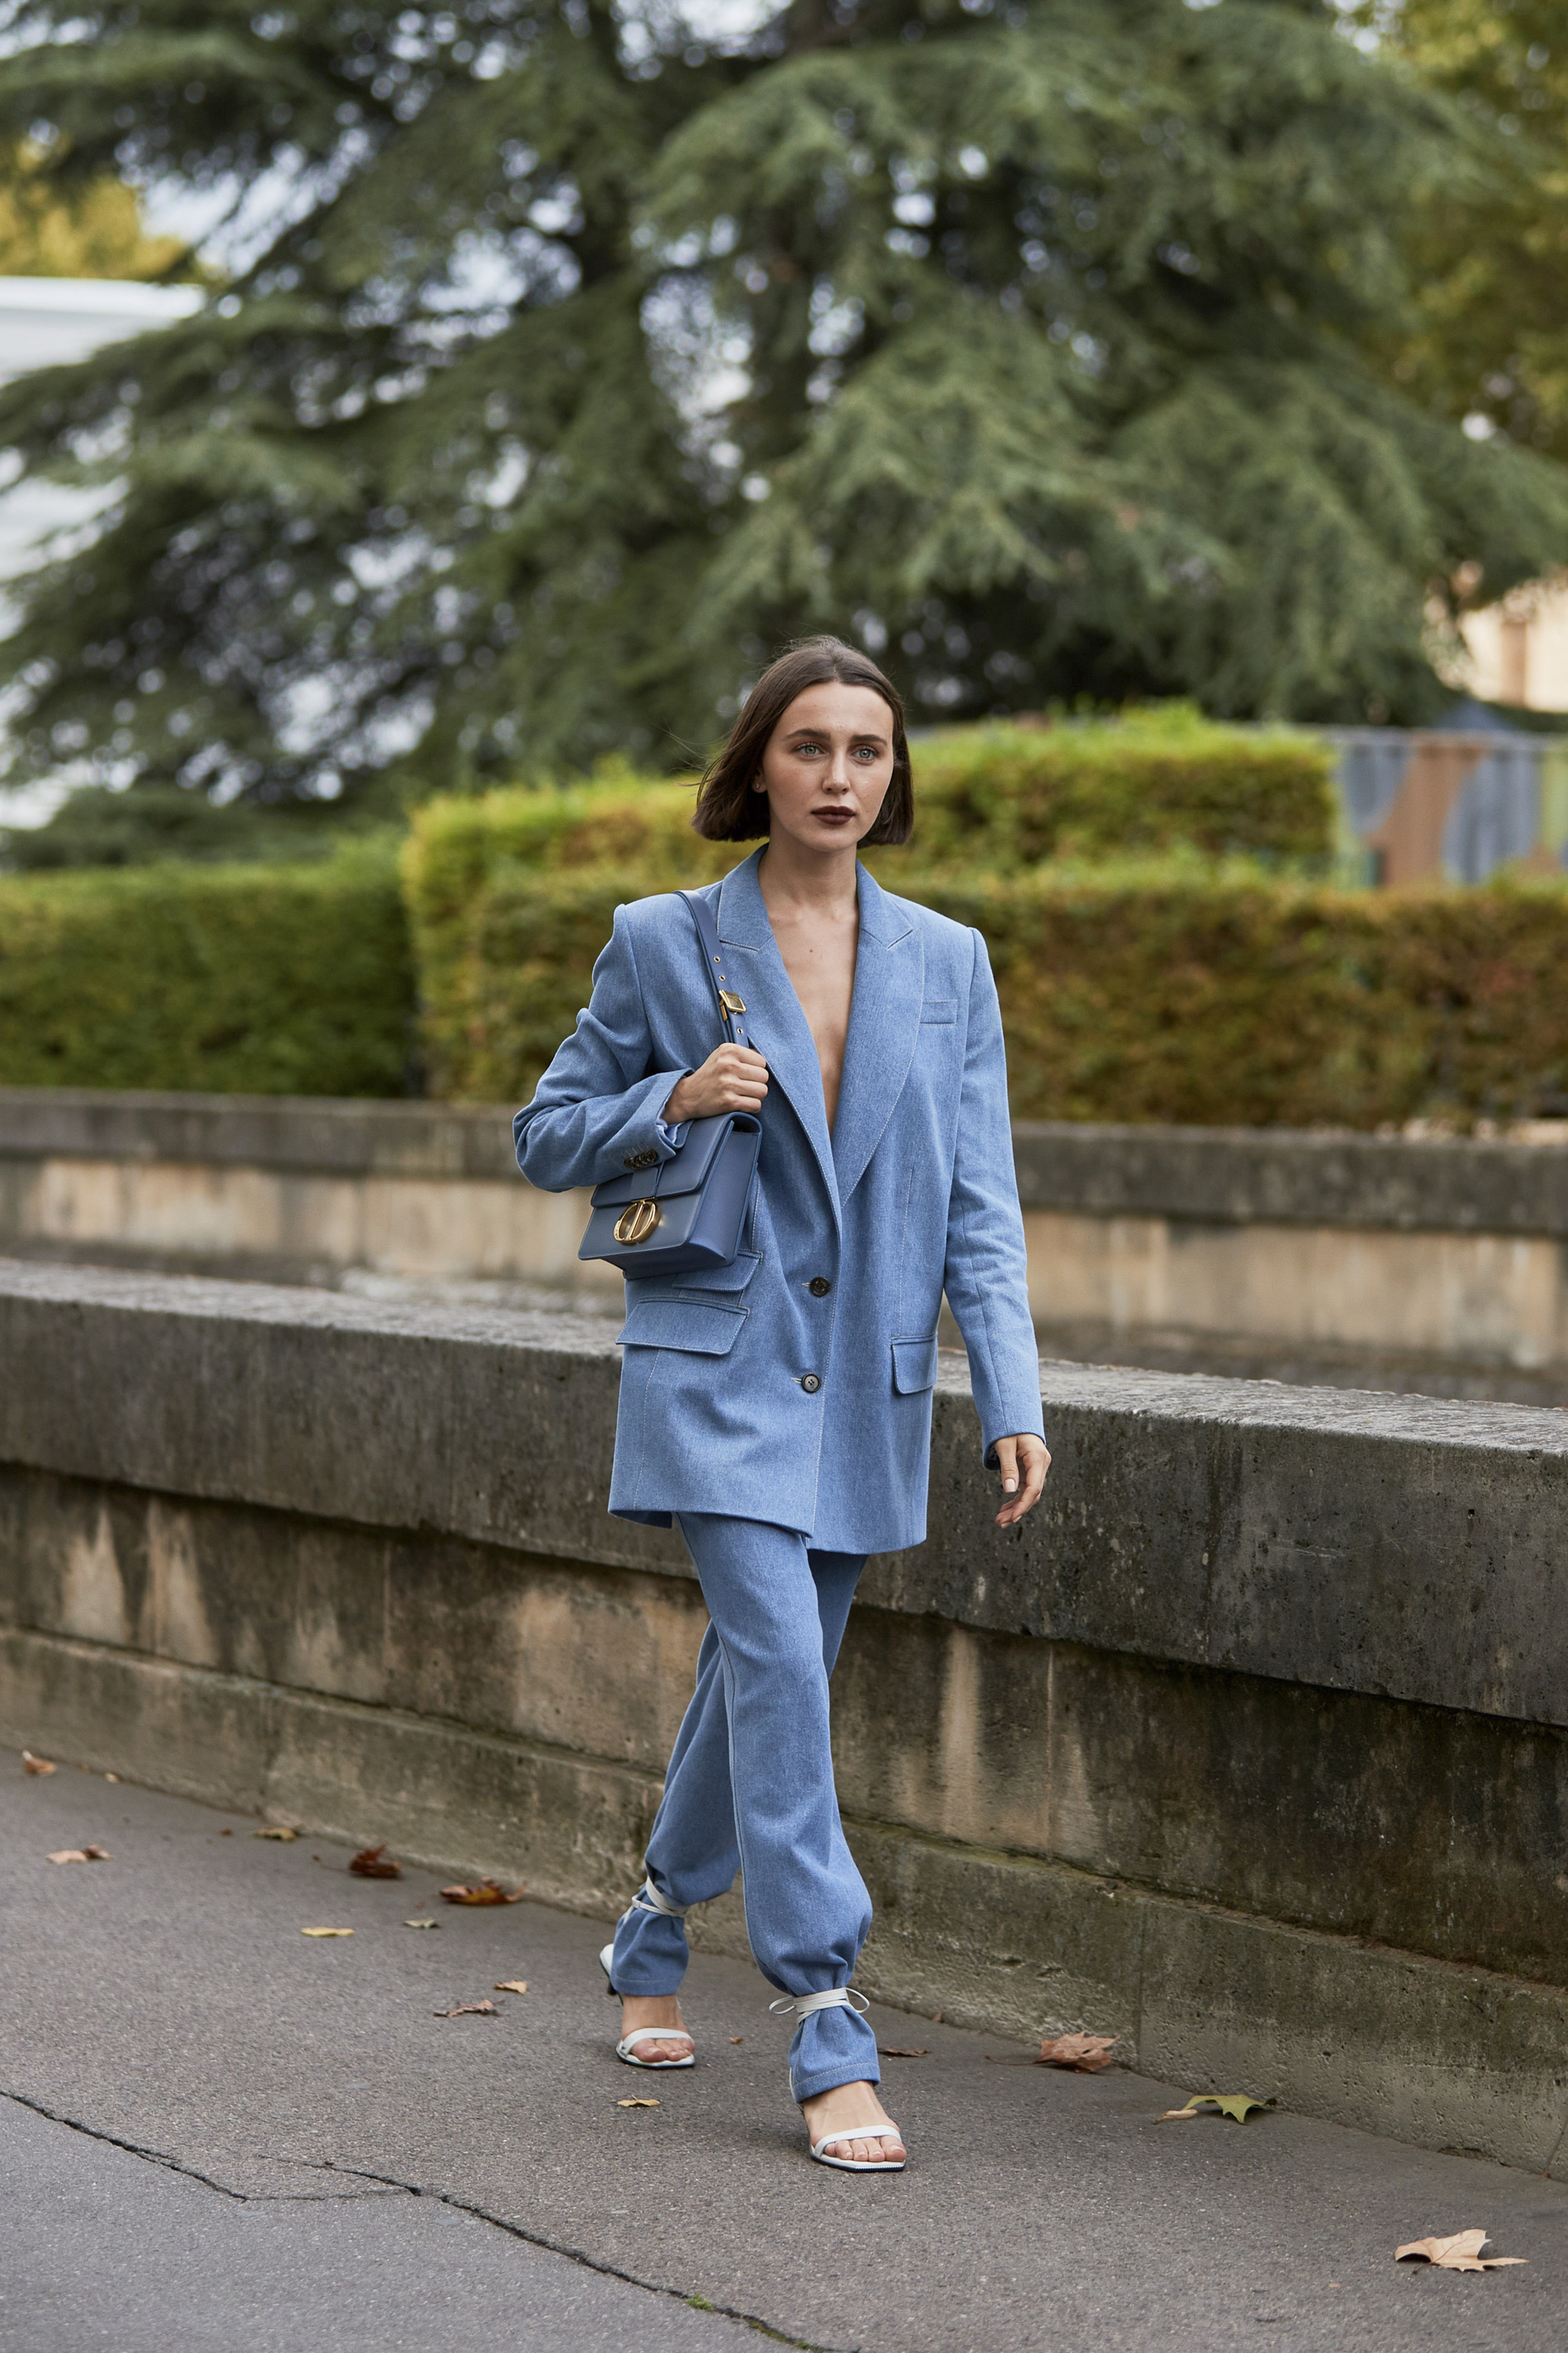 Street style look with an oversize suit jacket.